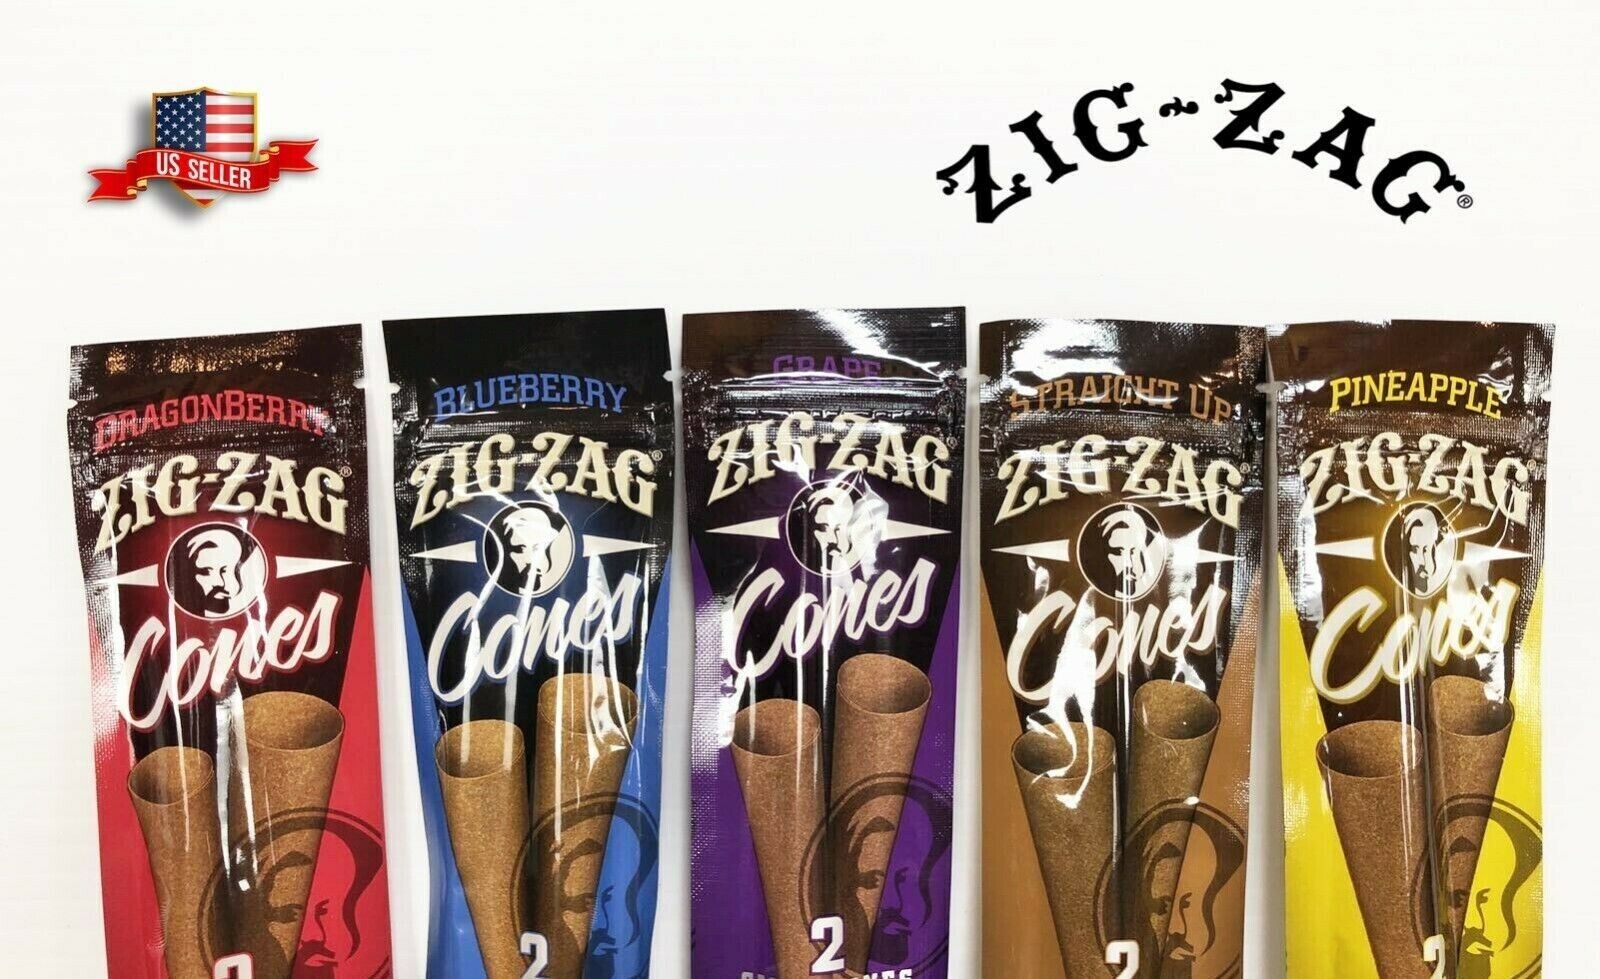 Zig Zag Cones 5-2Packs Variety Dragonberry/Blueberry/Pineapple/Grape/Straight Up